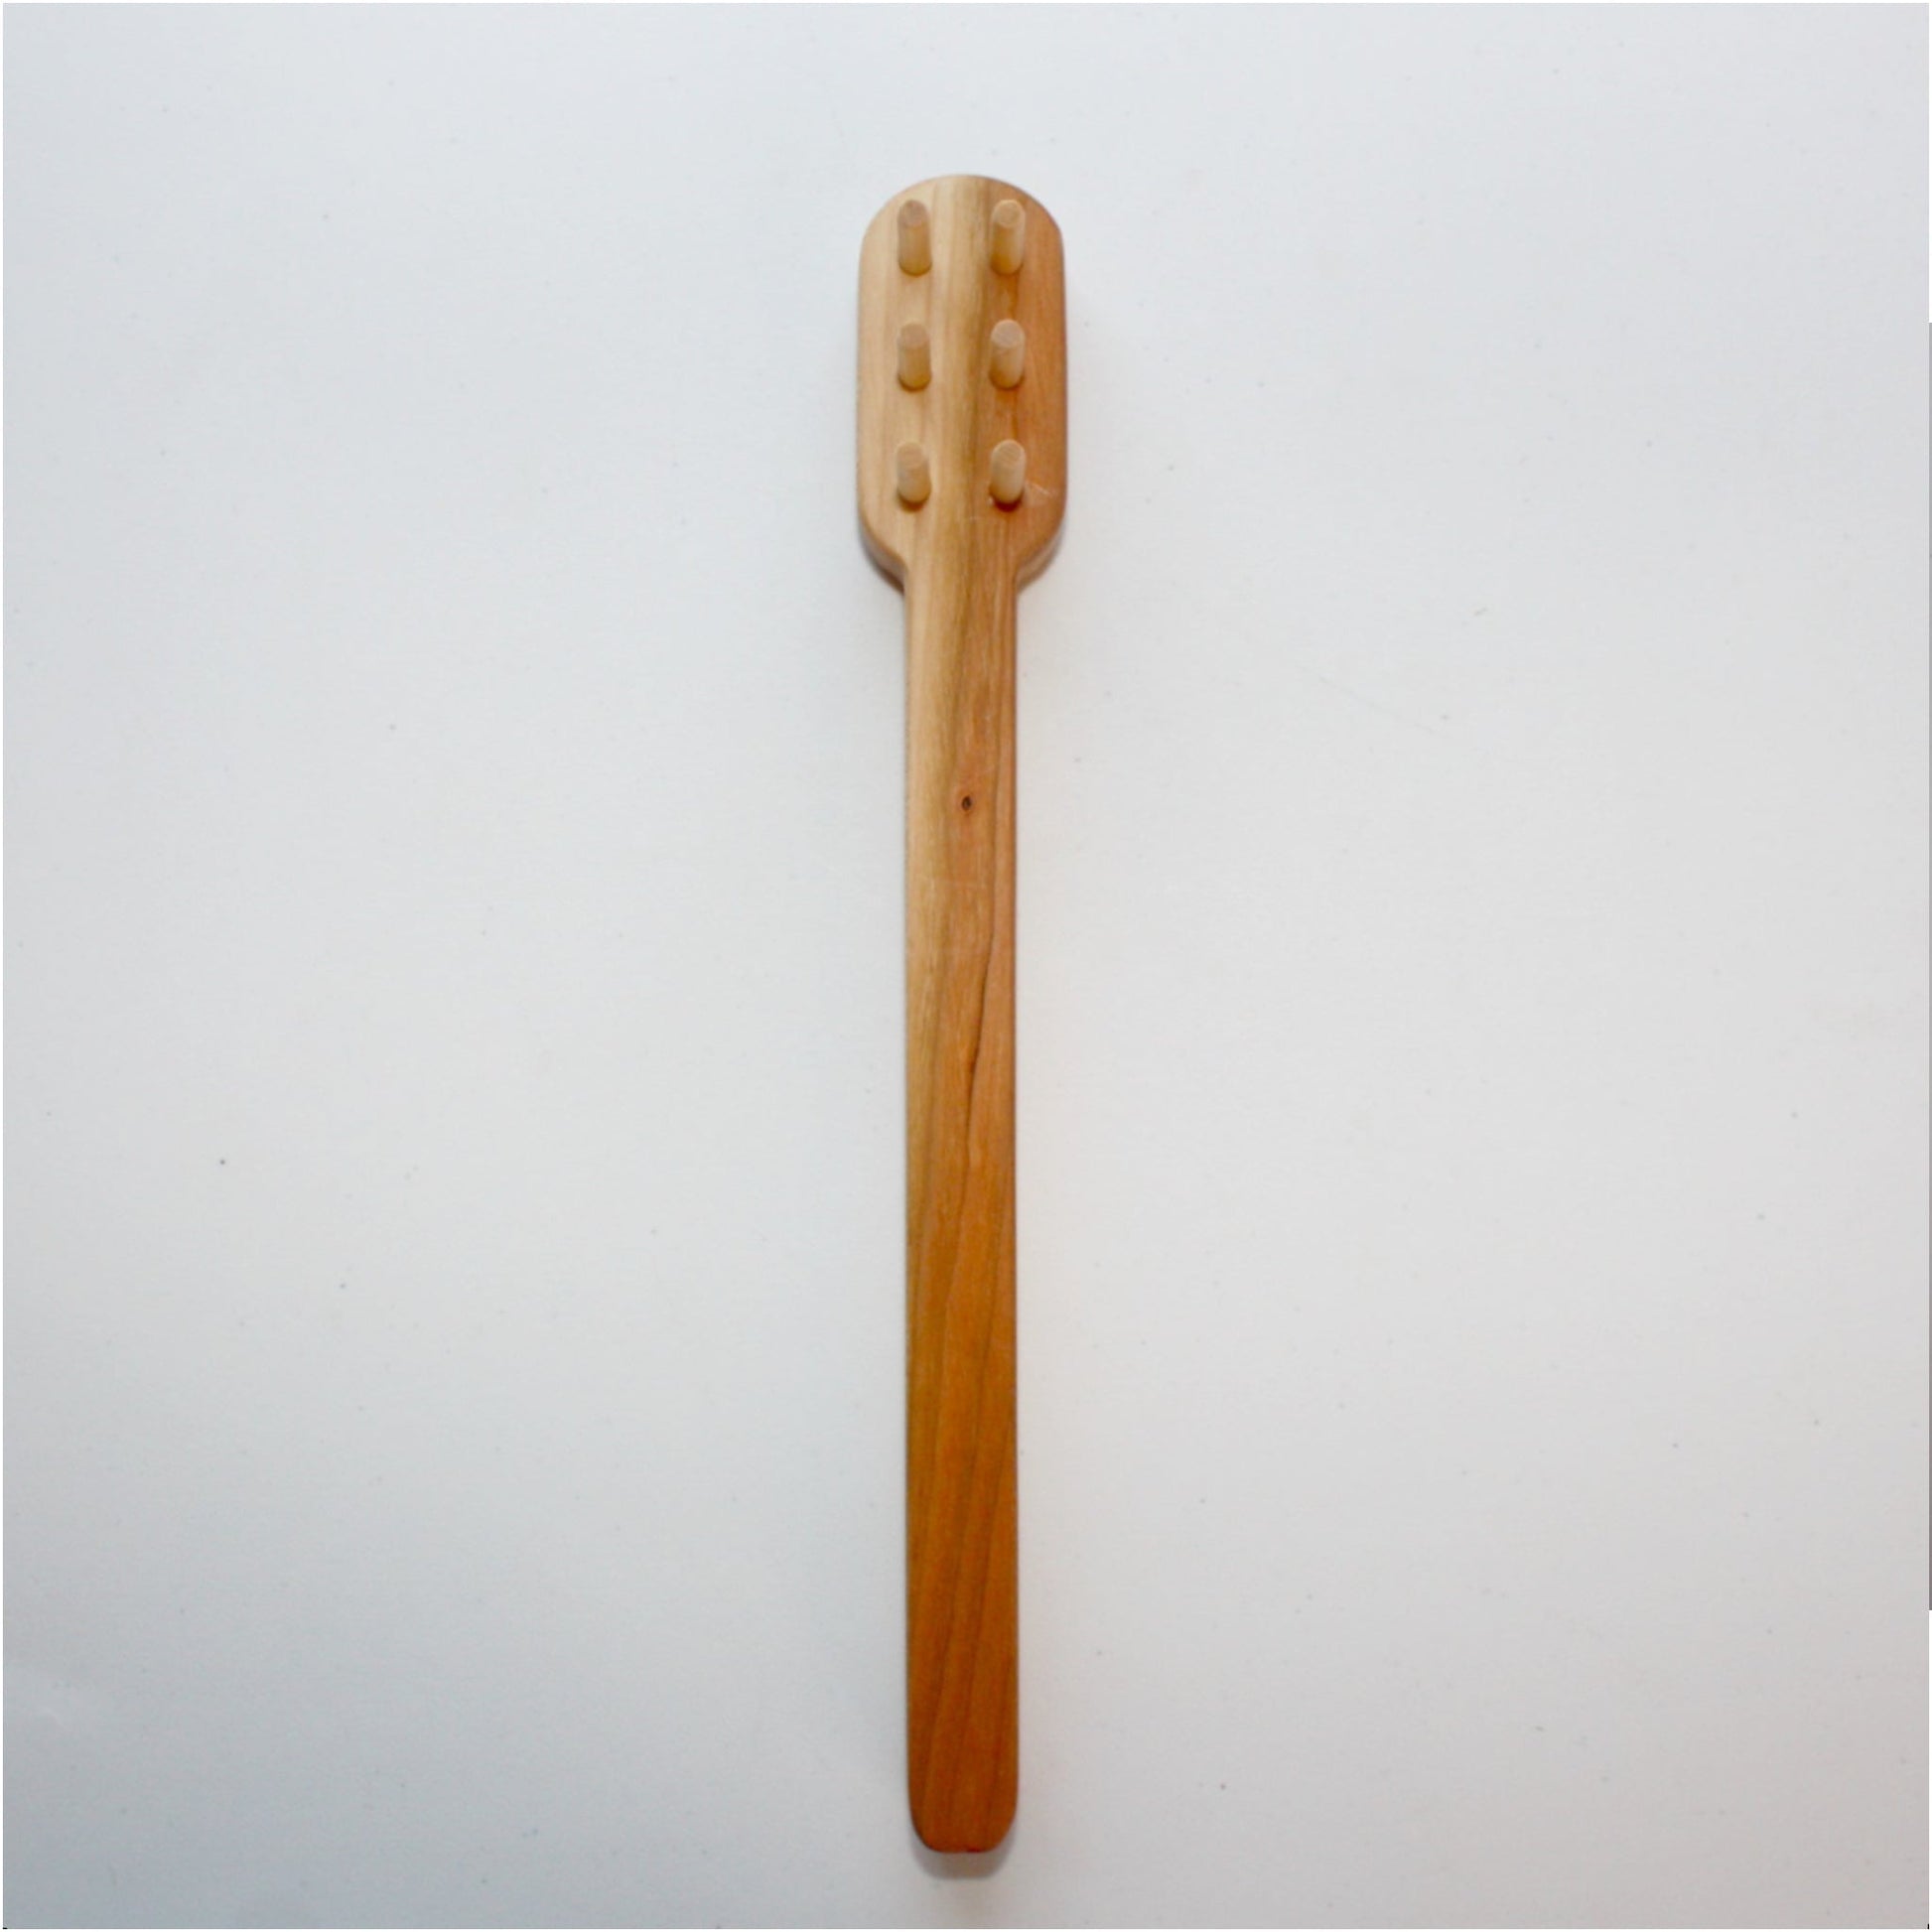 Large Handmade Wooden Pasta Fork - Made in the USA